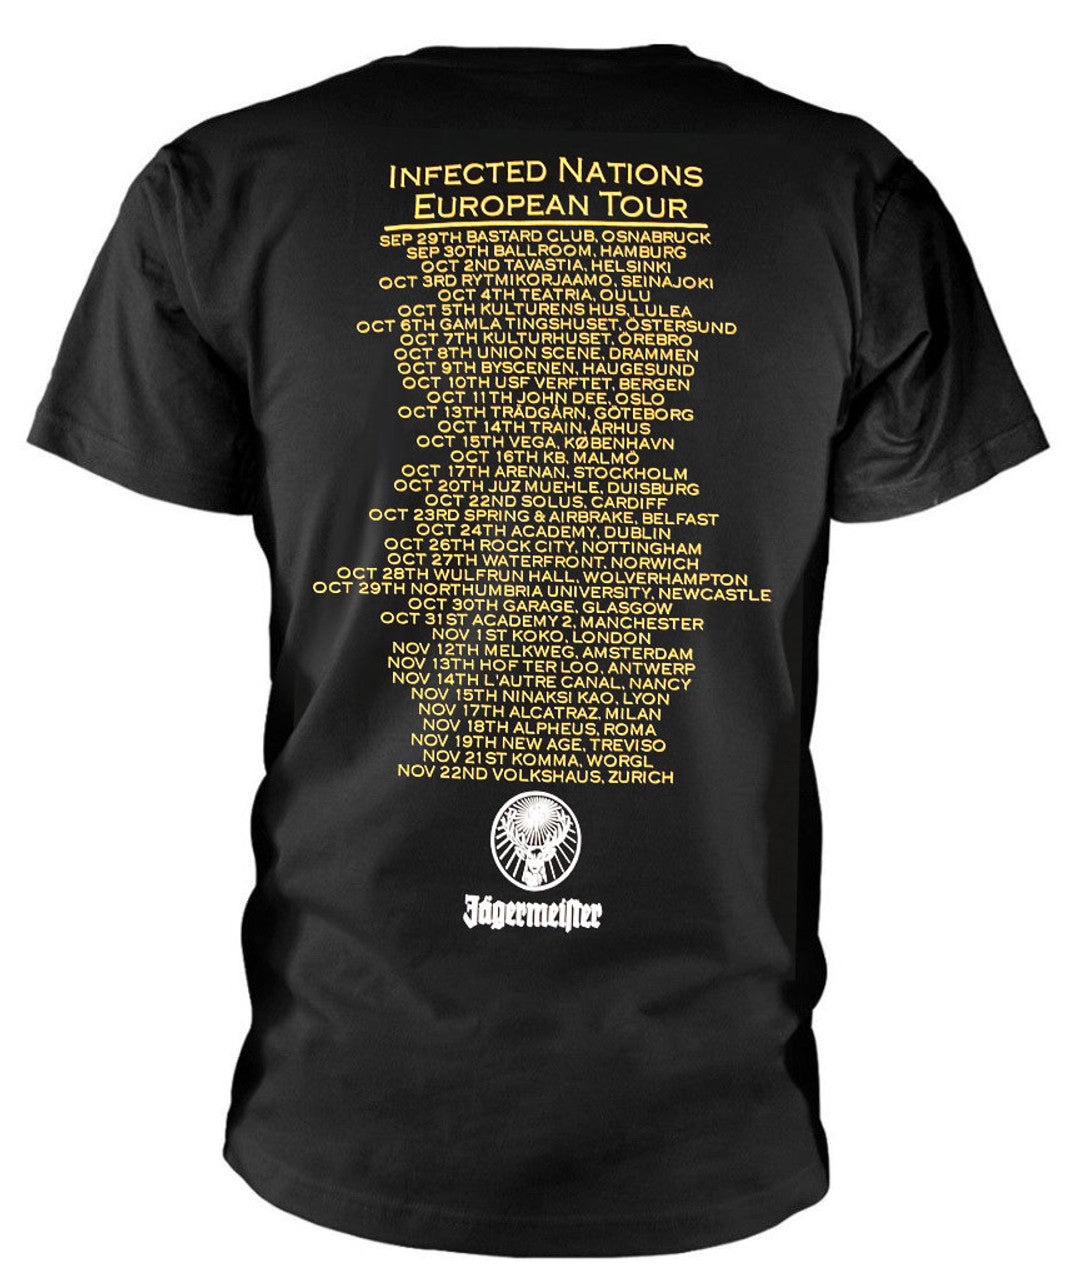 INFECTED NATIONS T-SHIRT